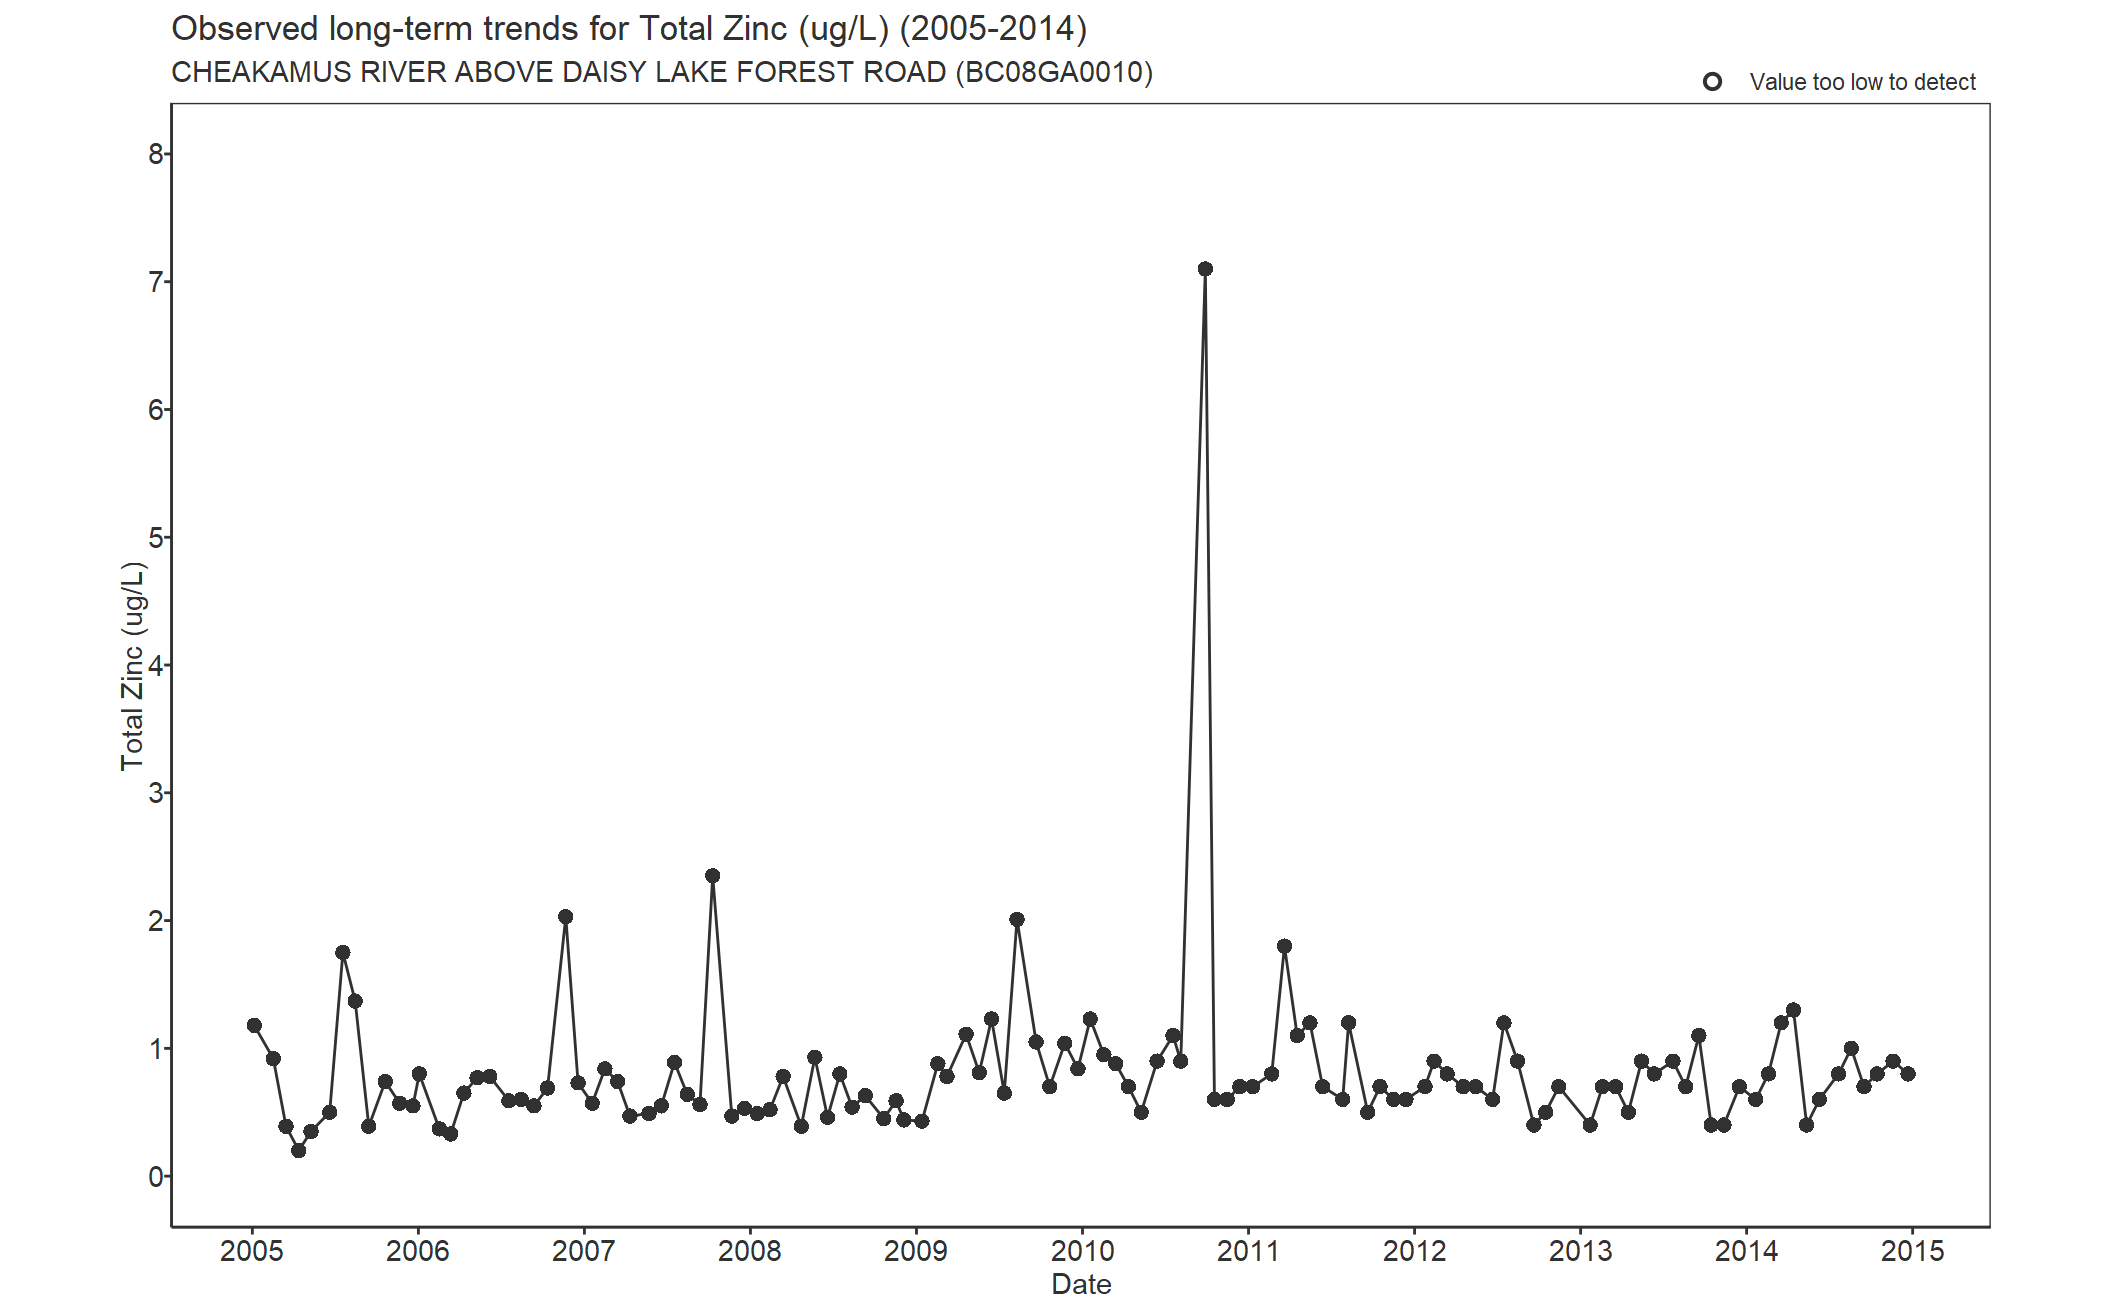 Observed long-term trends for Total Zinc (2005-2014)